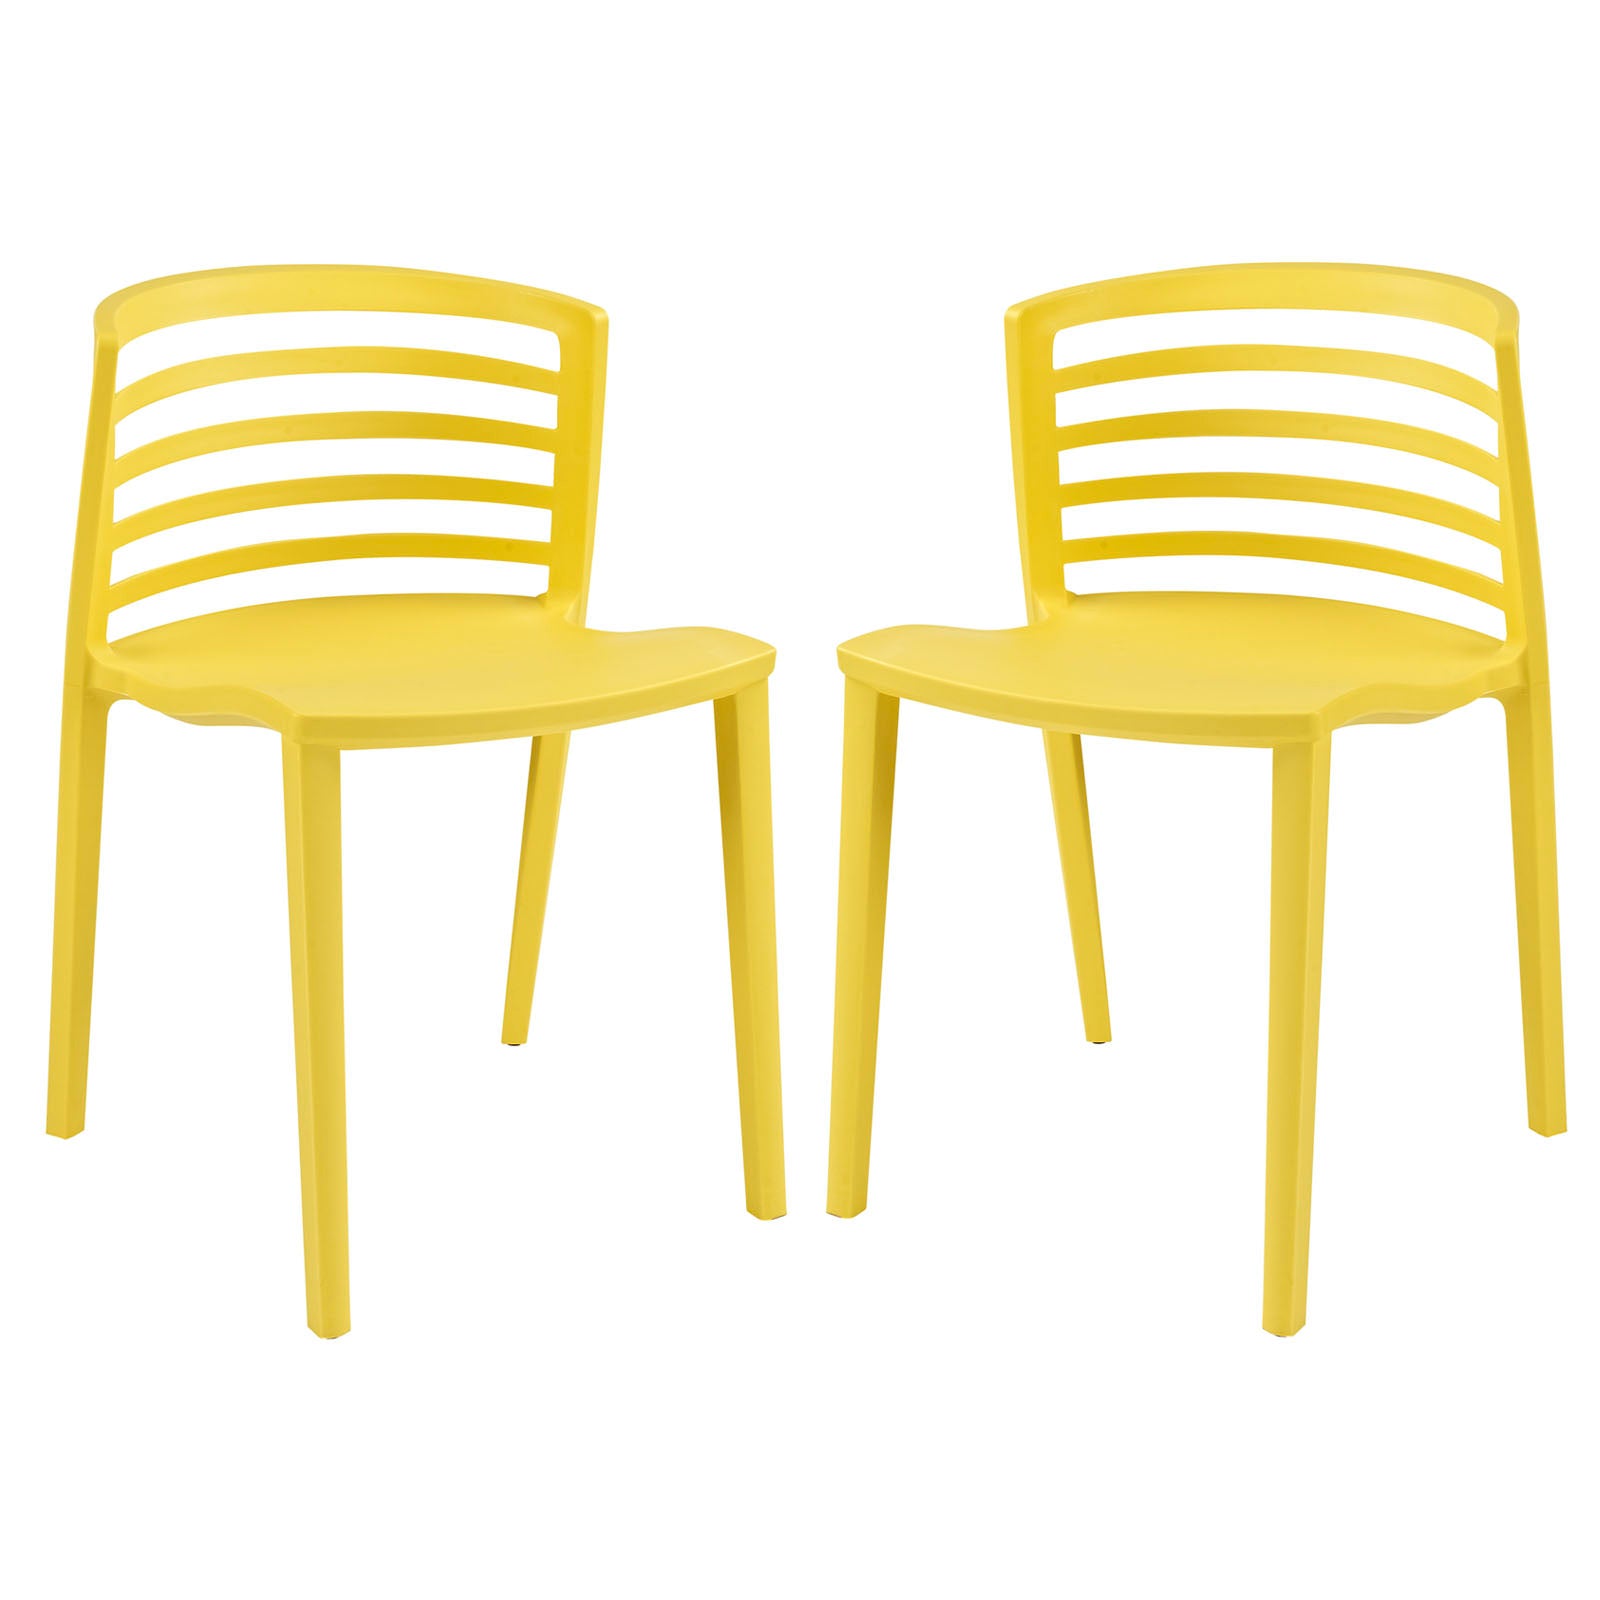 Curvy Dining Chairs Set of 2 - East Shore Modern Home Furnishings